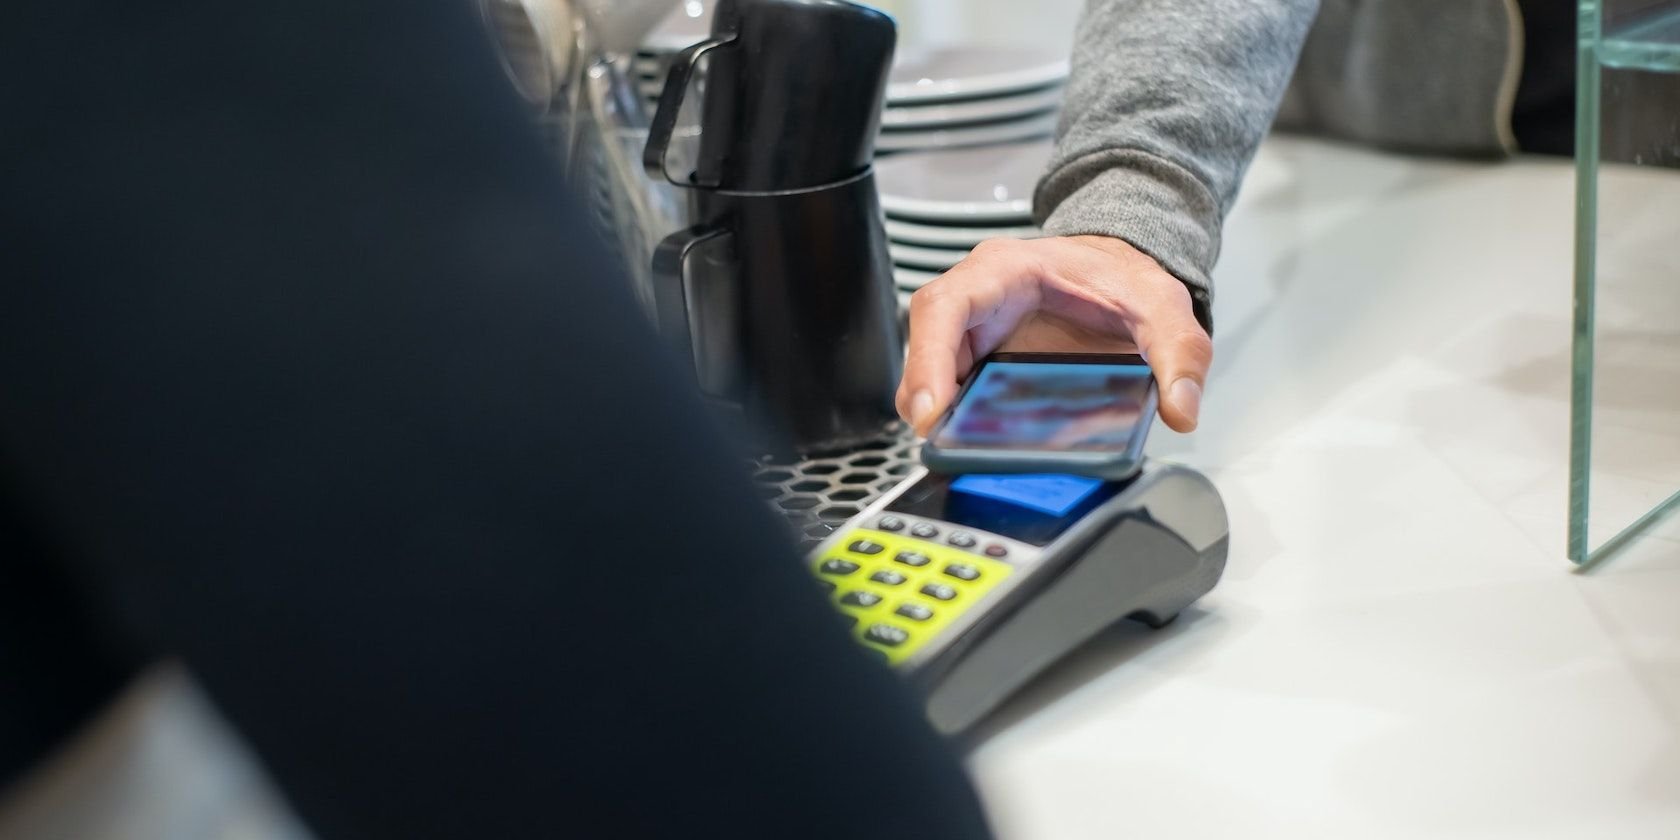 6 Reasons Why You Might Not Want to Use Apple Pay